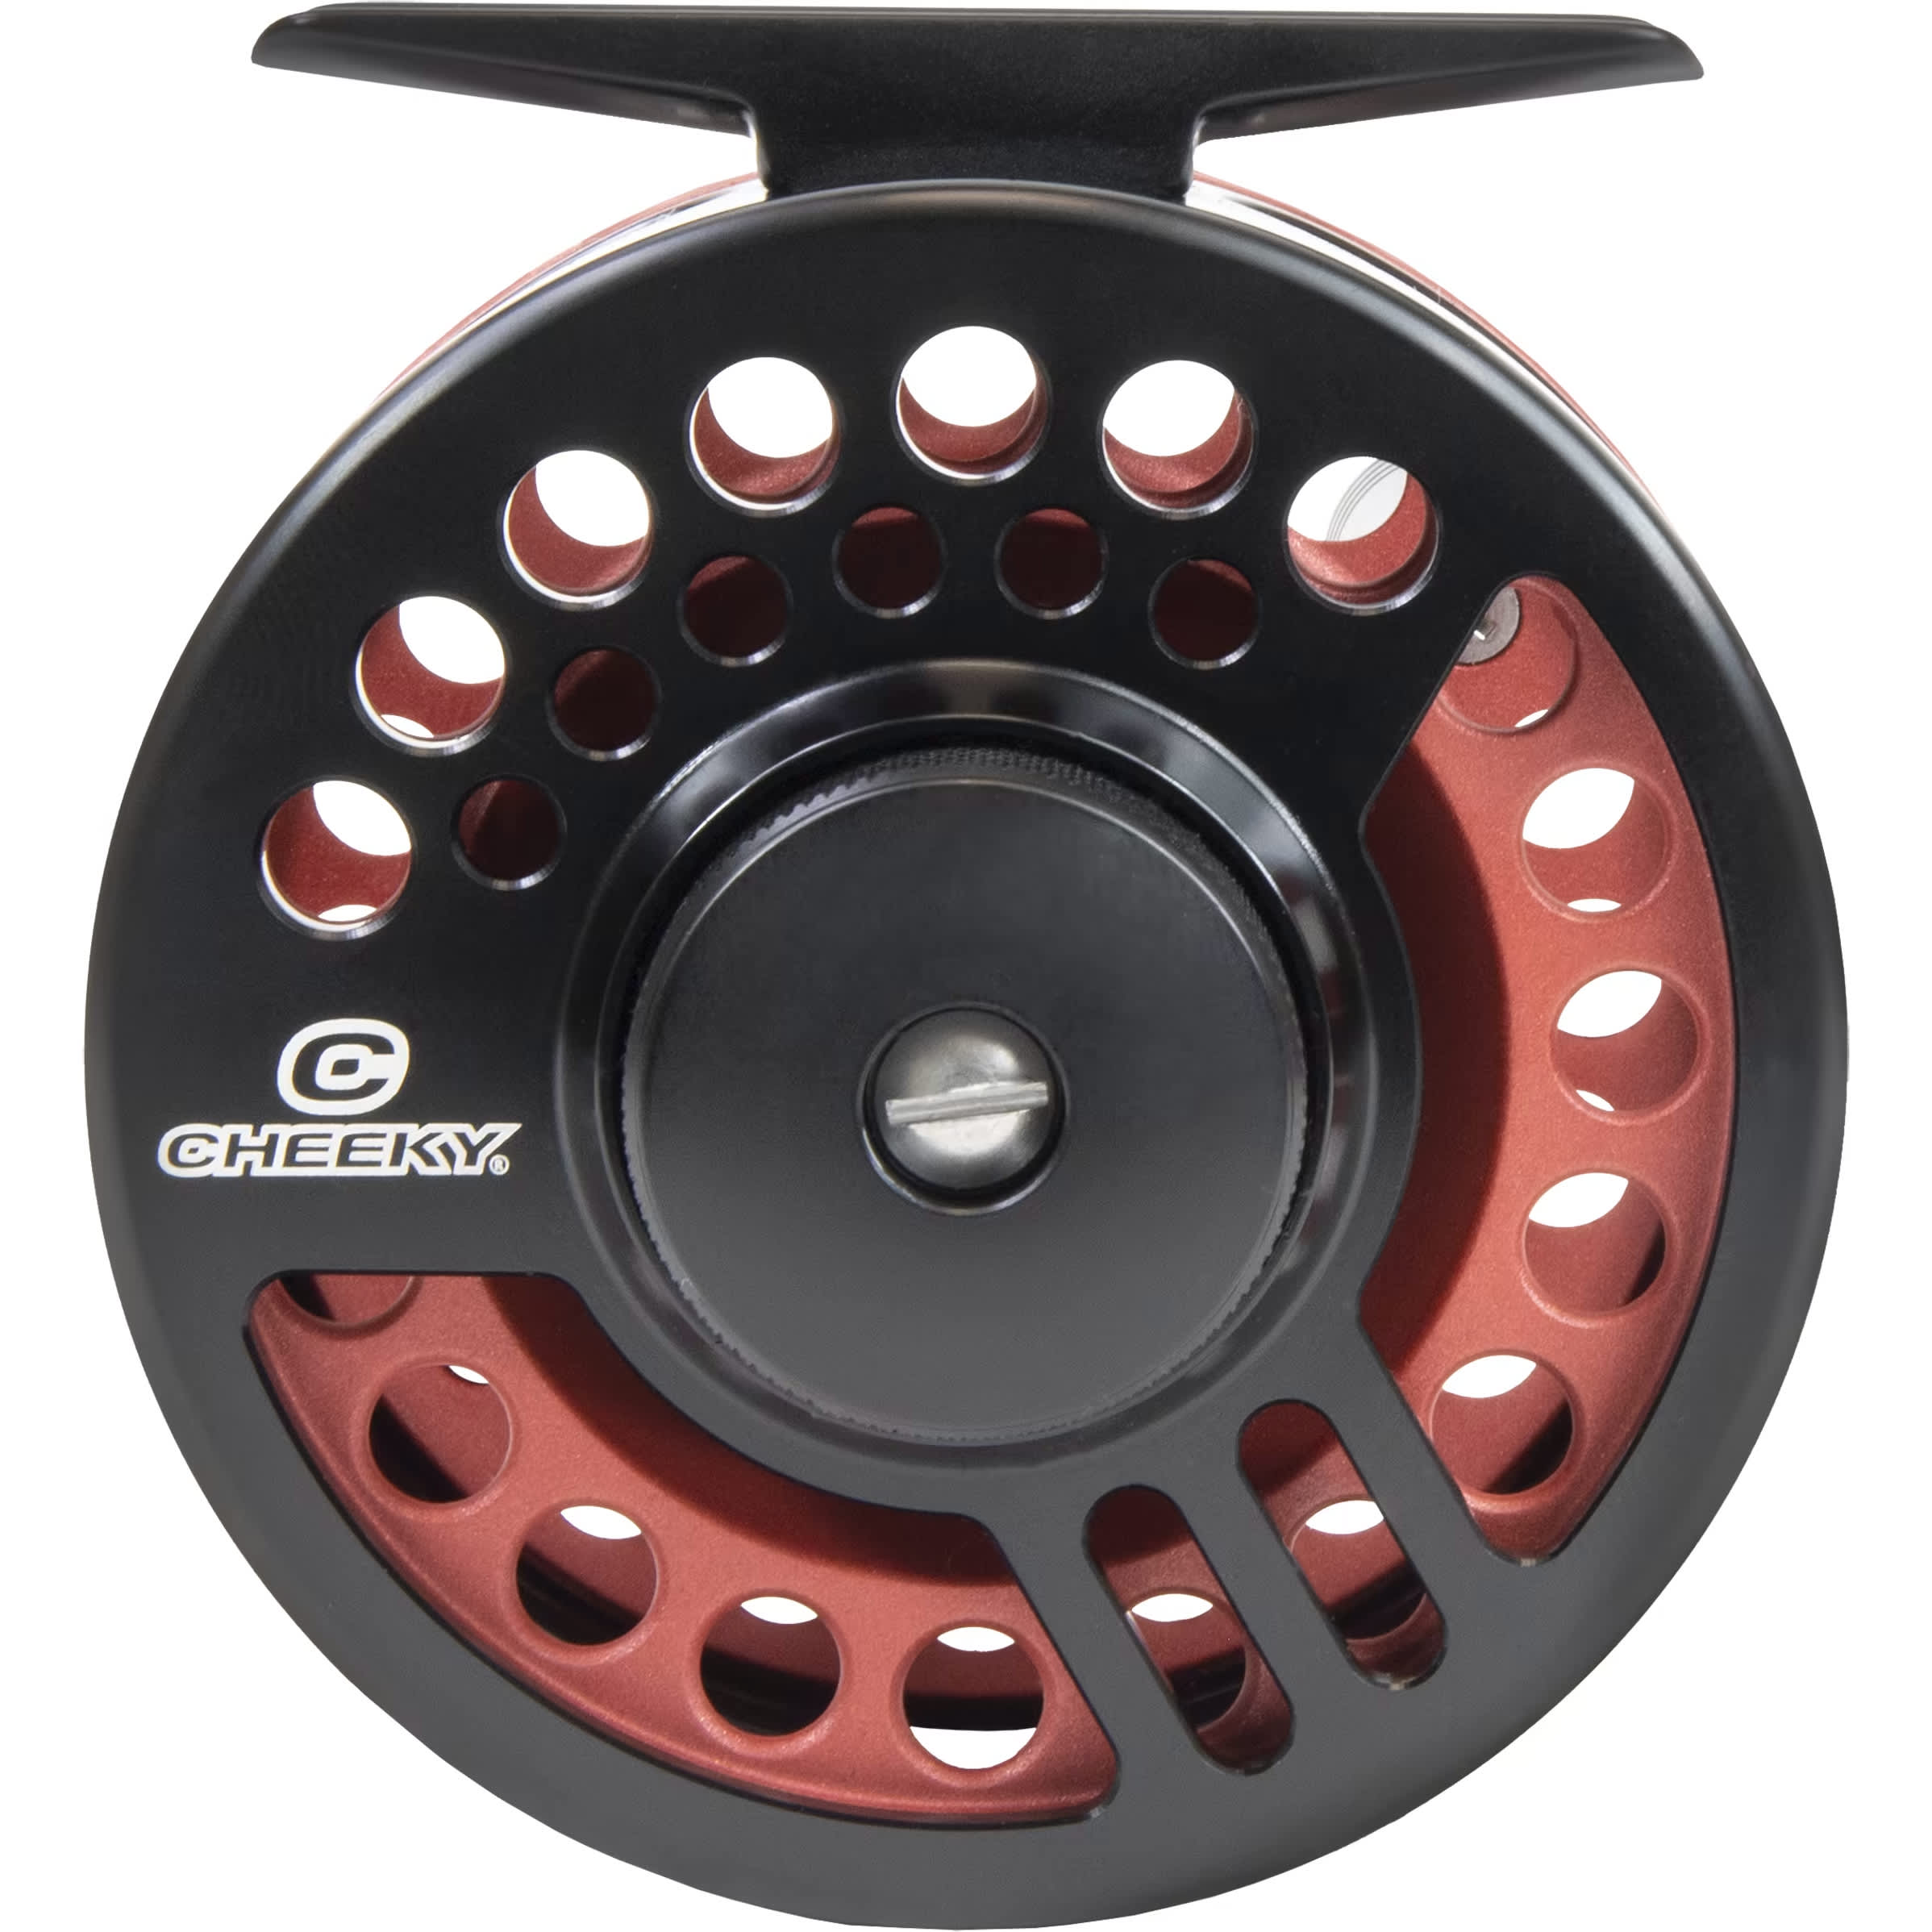 Cheeky Sighter Fly Reel - 300